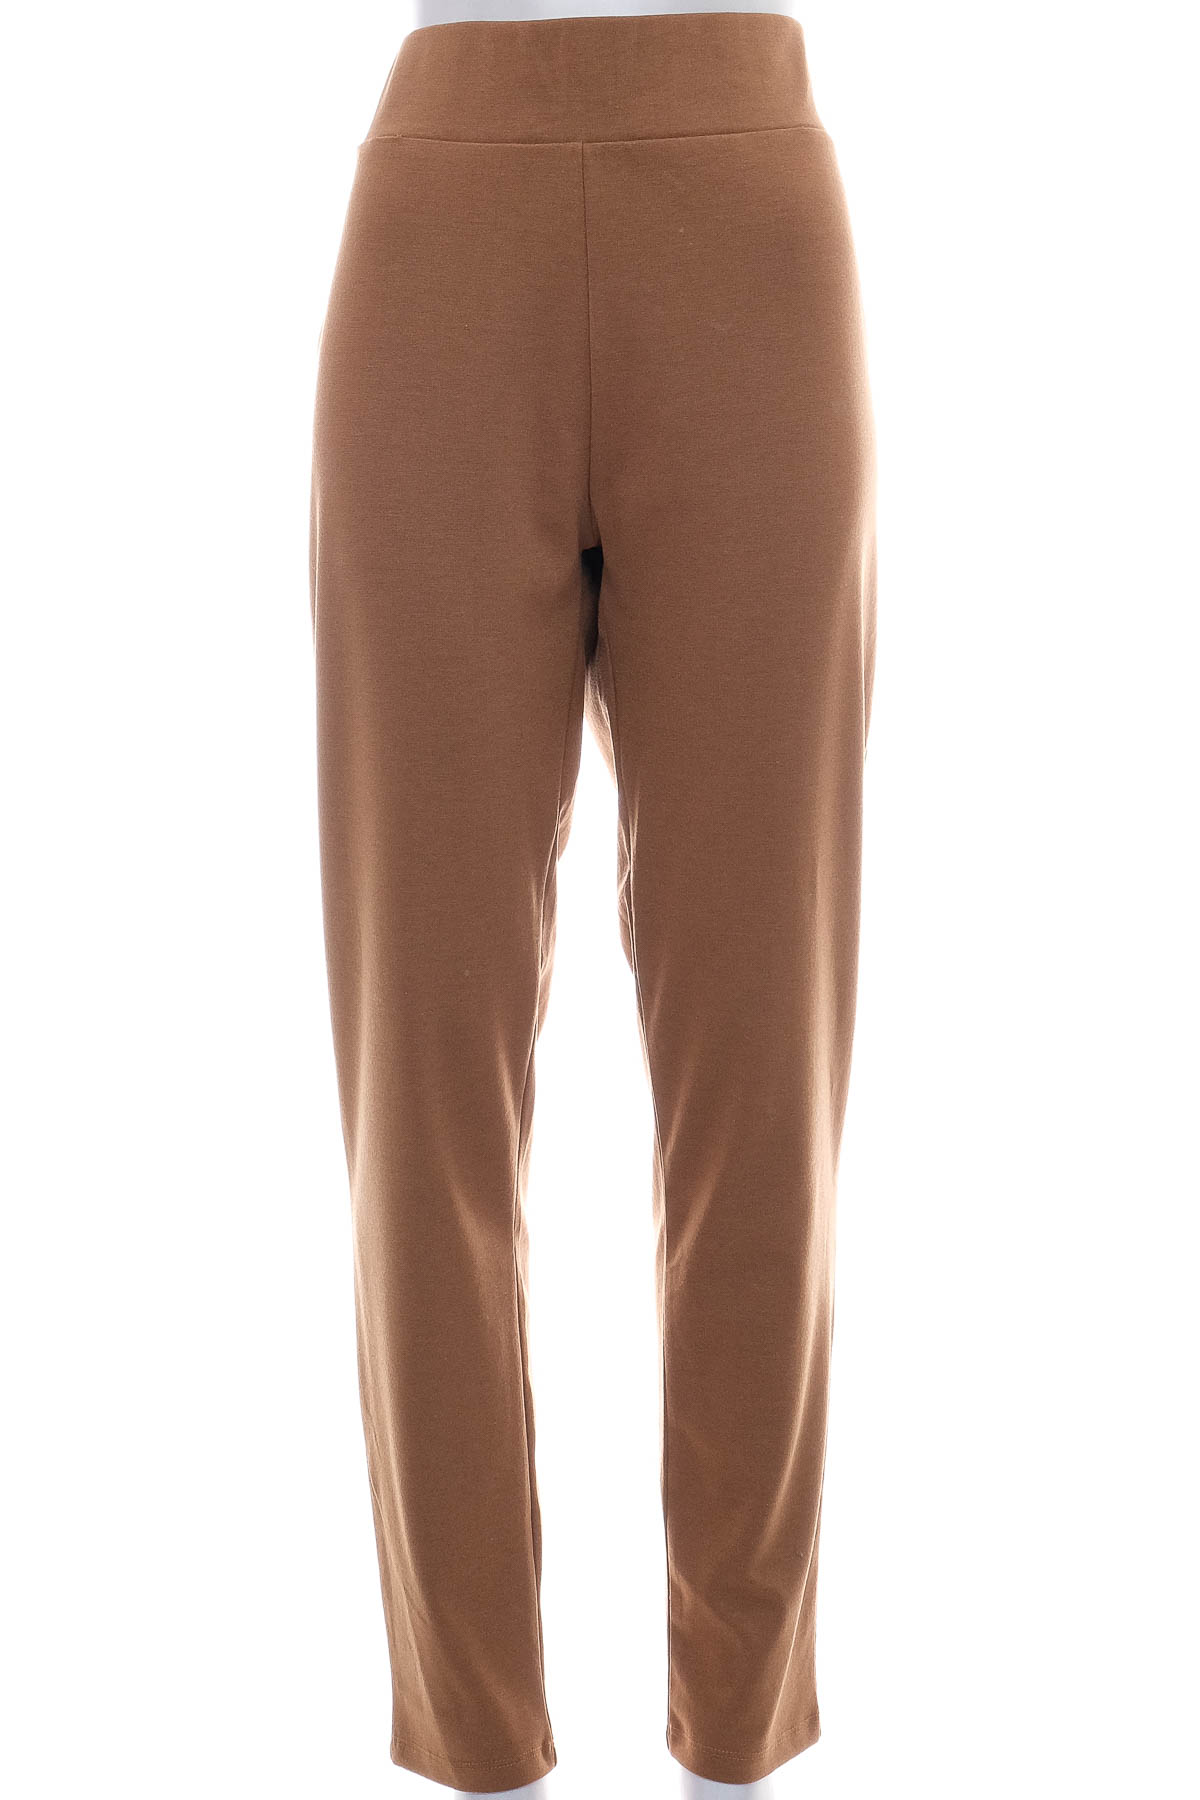 Women's trousers - XL COLLECTION - 0